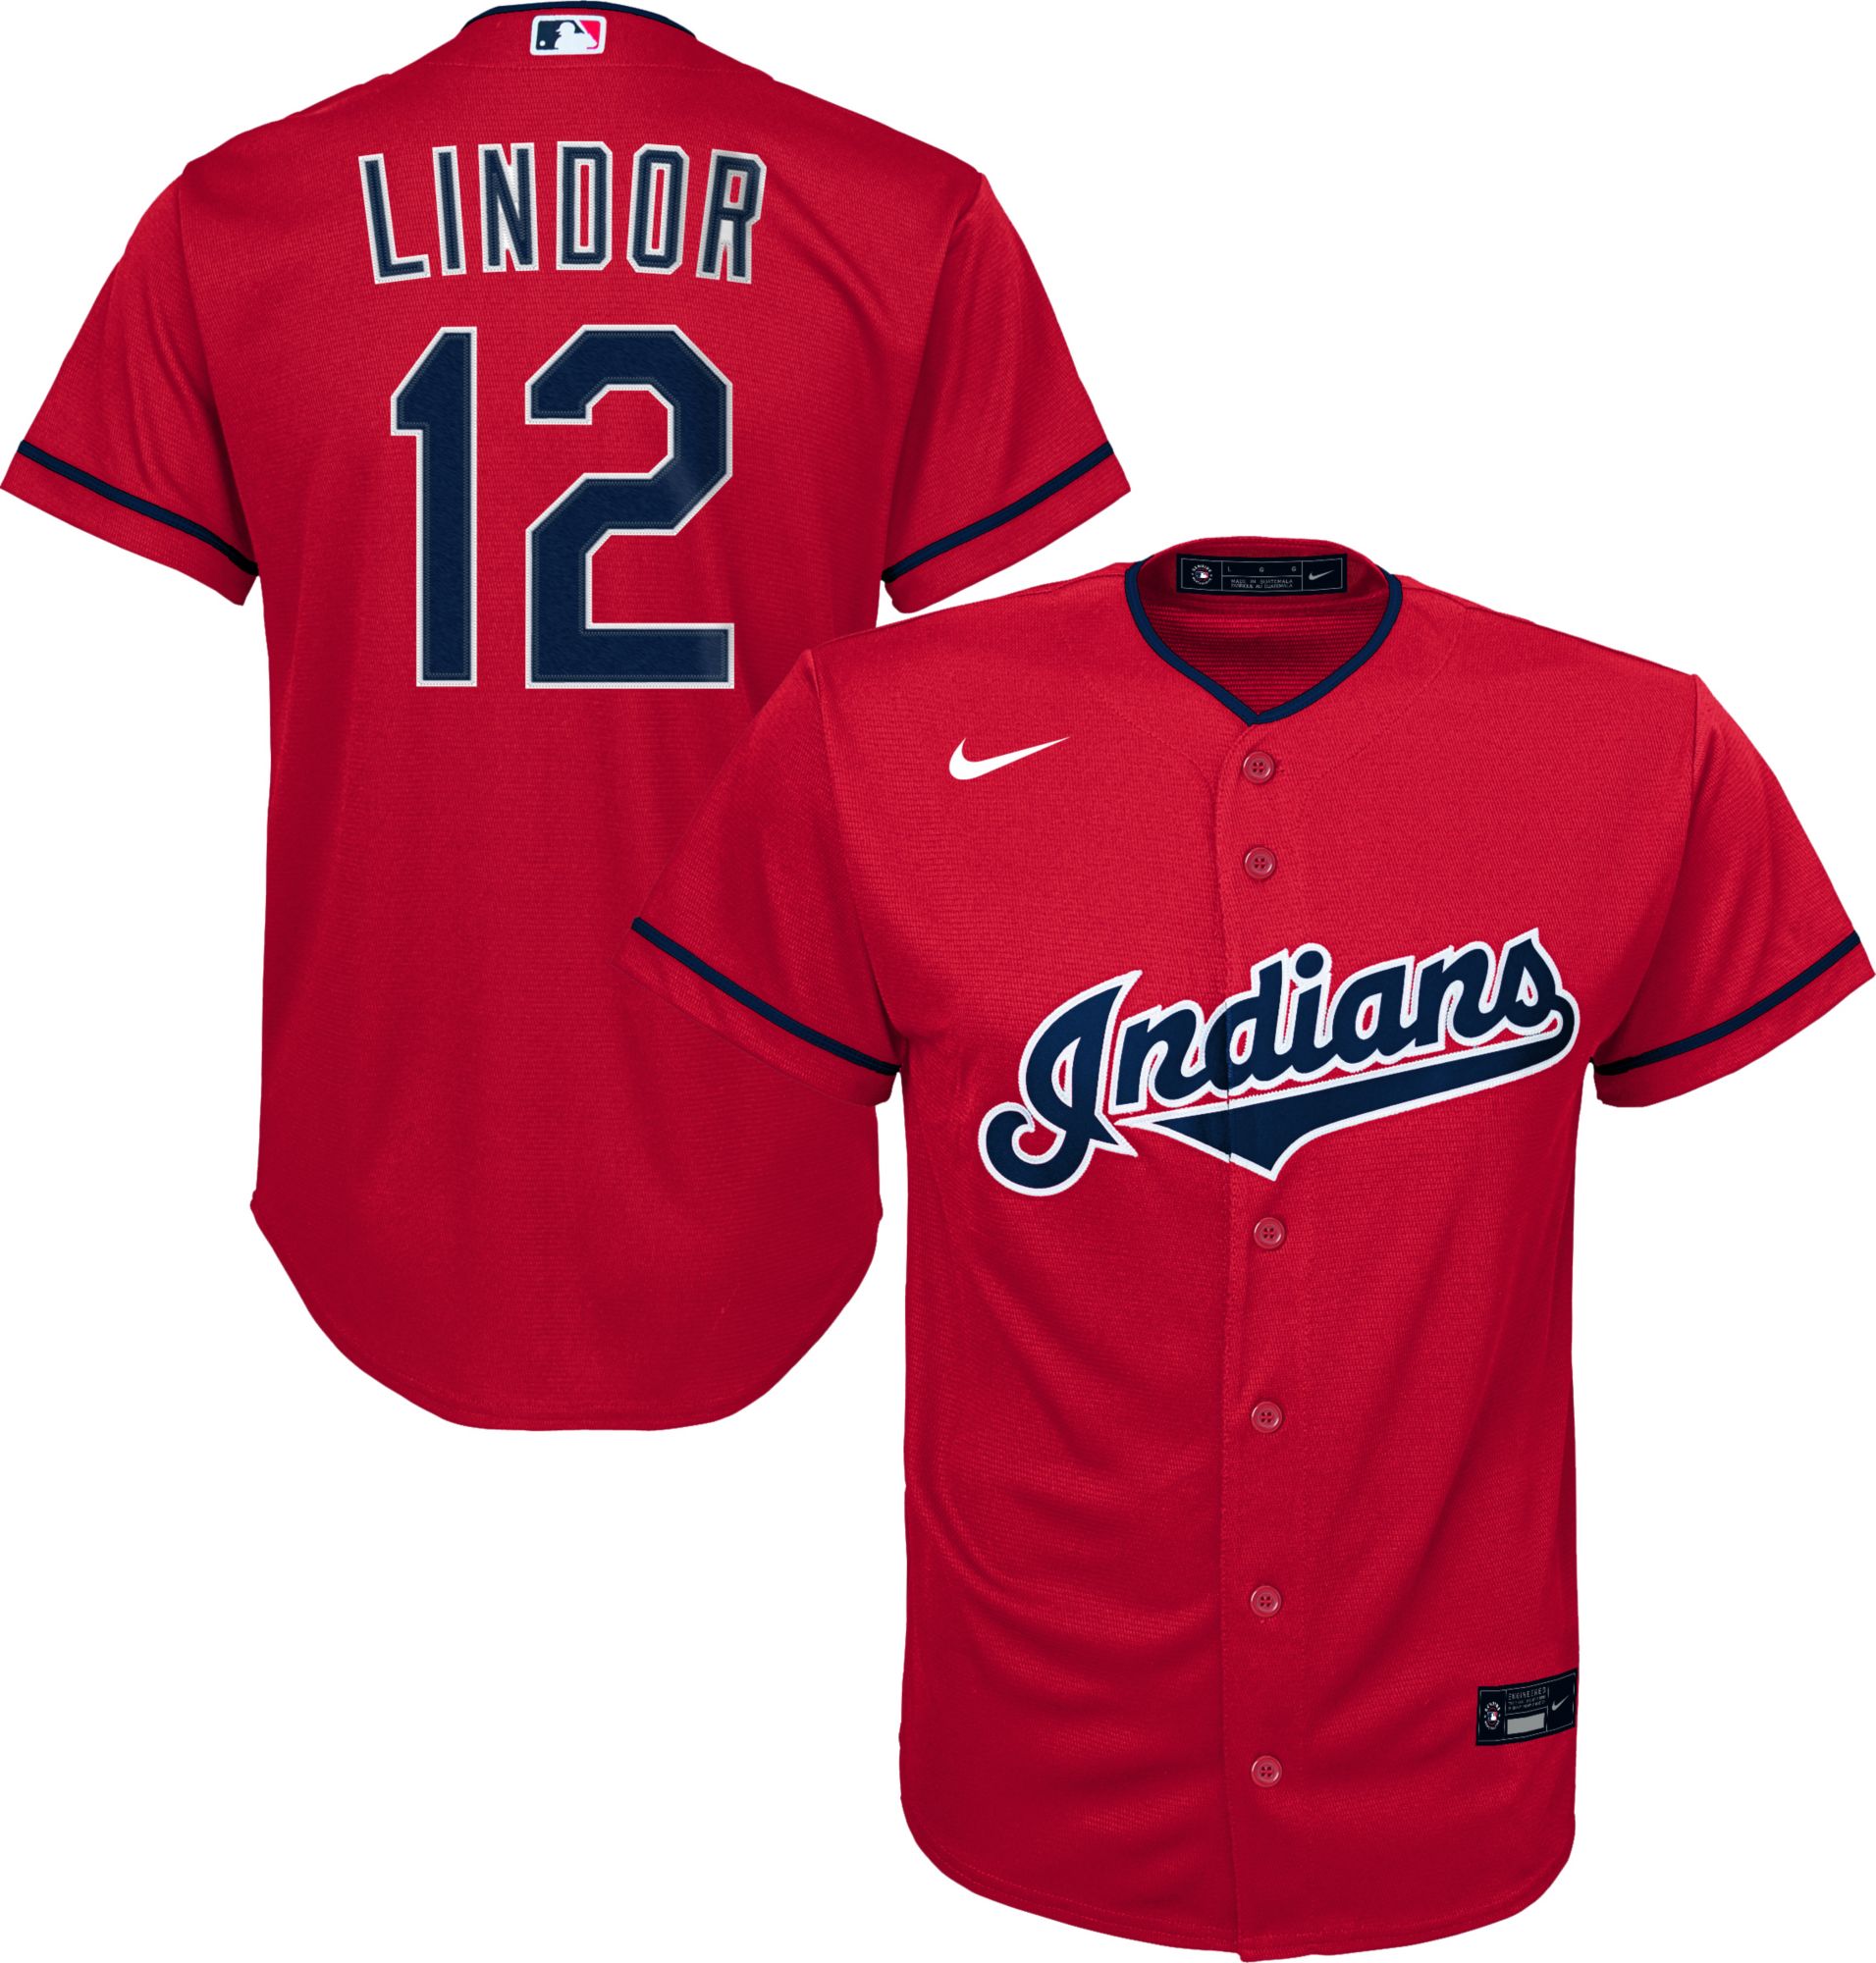 Nike Youth Replica Cleveland Indians 